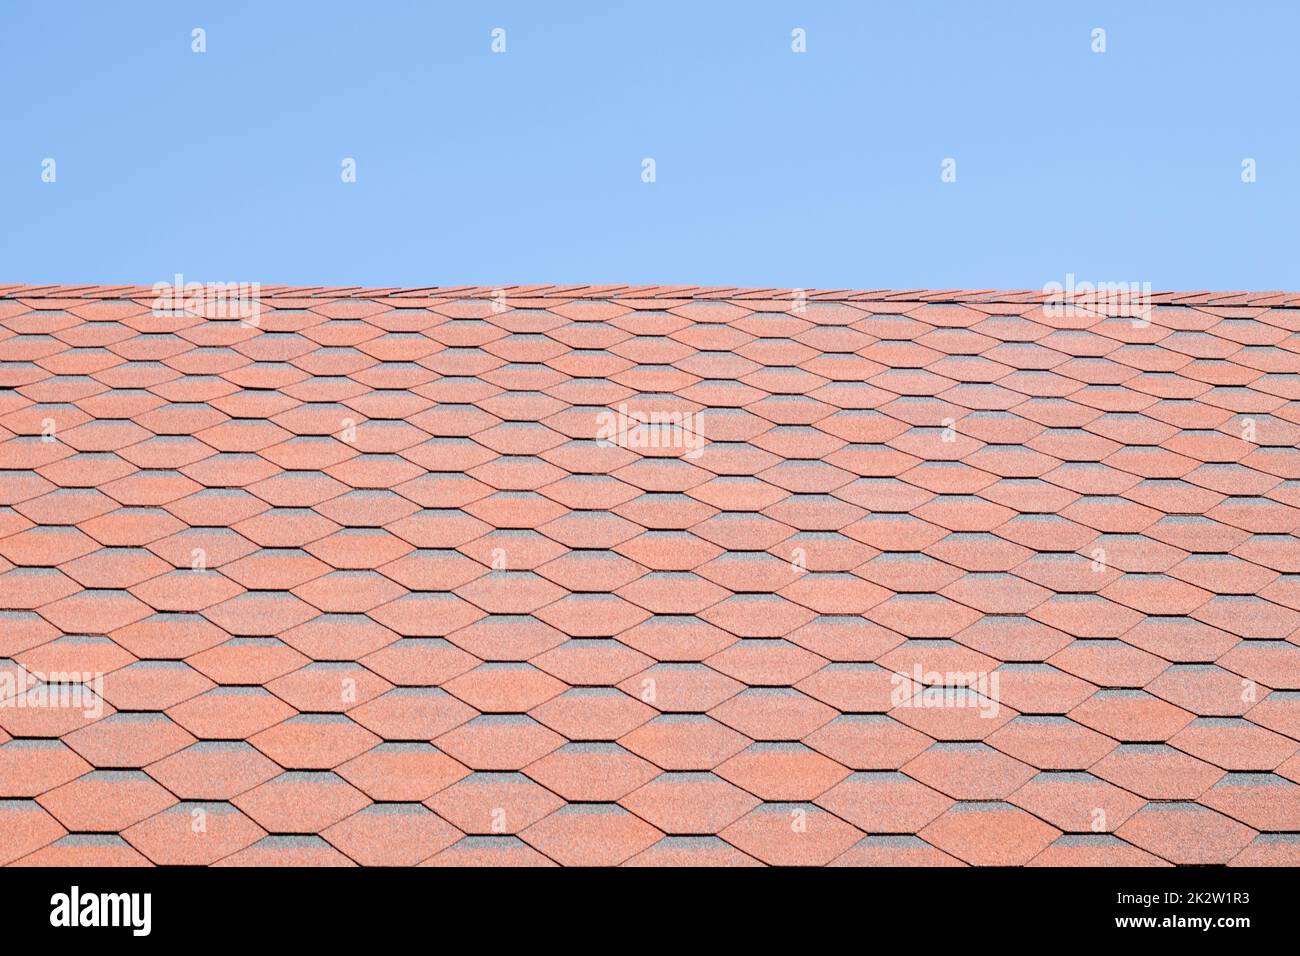 New roof with red shingles against the blue sky. High quality photo. Tiles on the roof of the house. Use to advertise roof fabrication and maintenance. Spotted texture. Affordable roofing. Stock Photo